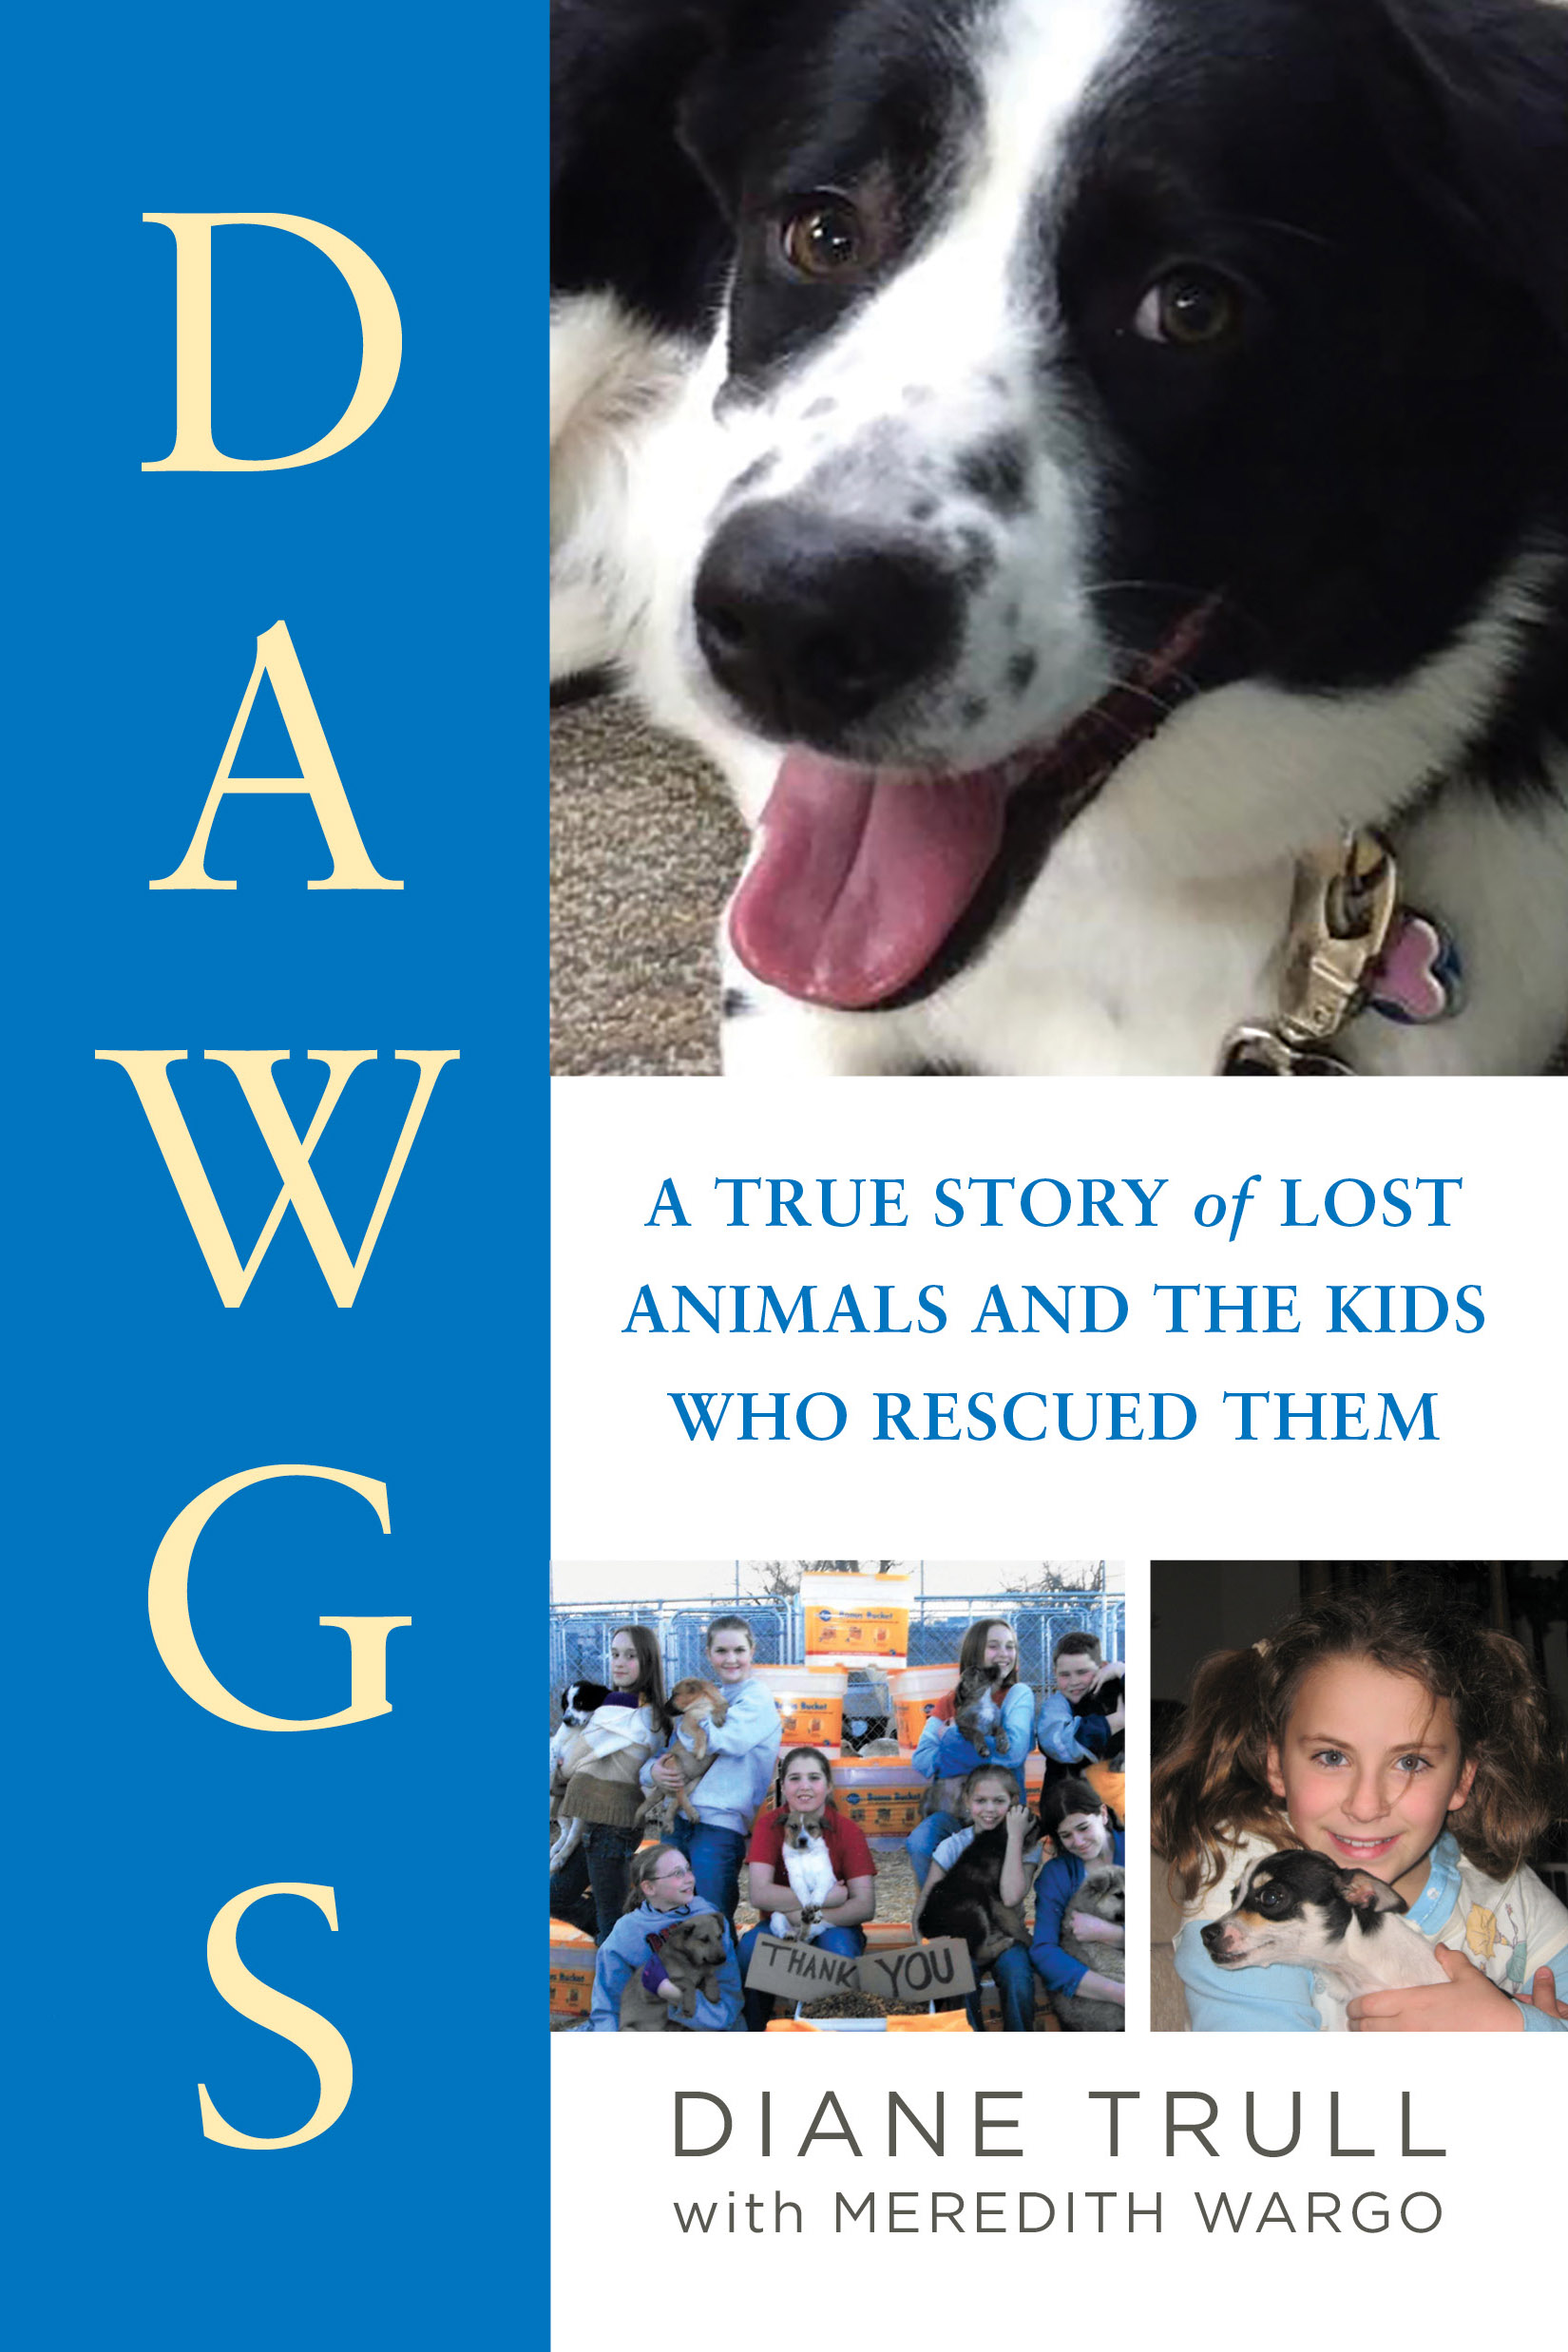 Book cover image of DAWGS showing children and dogs